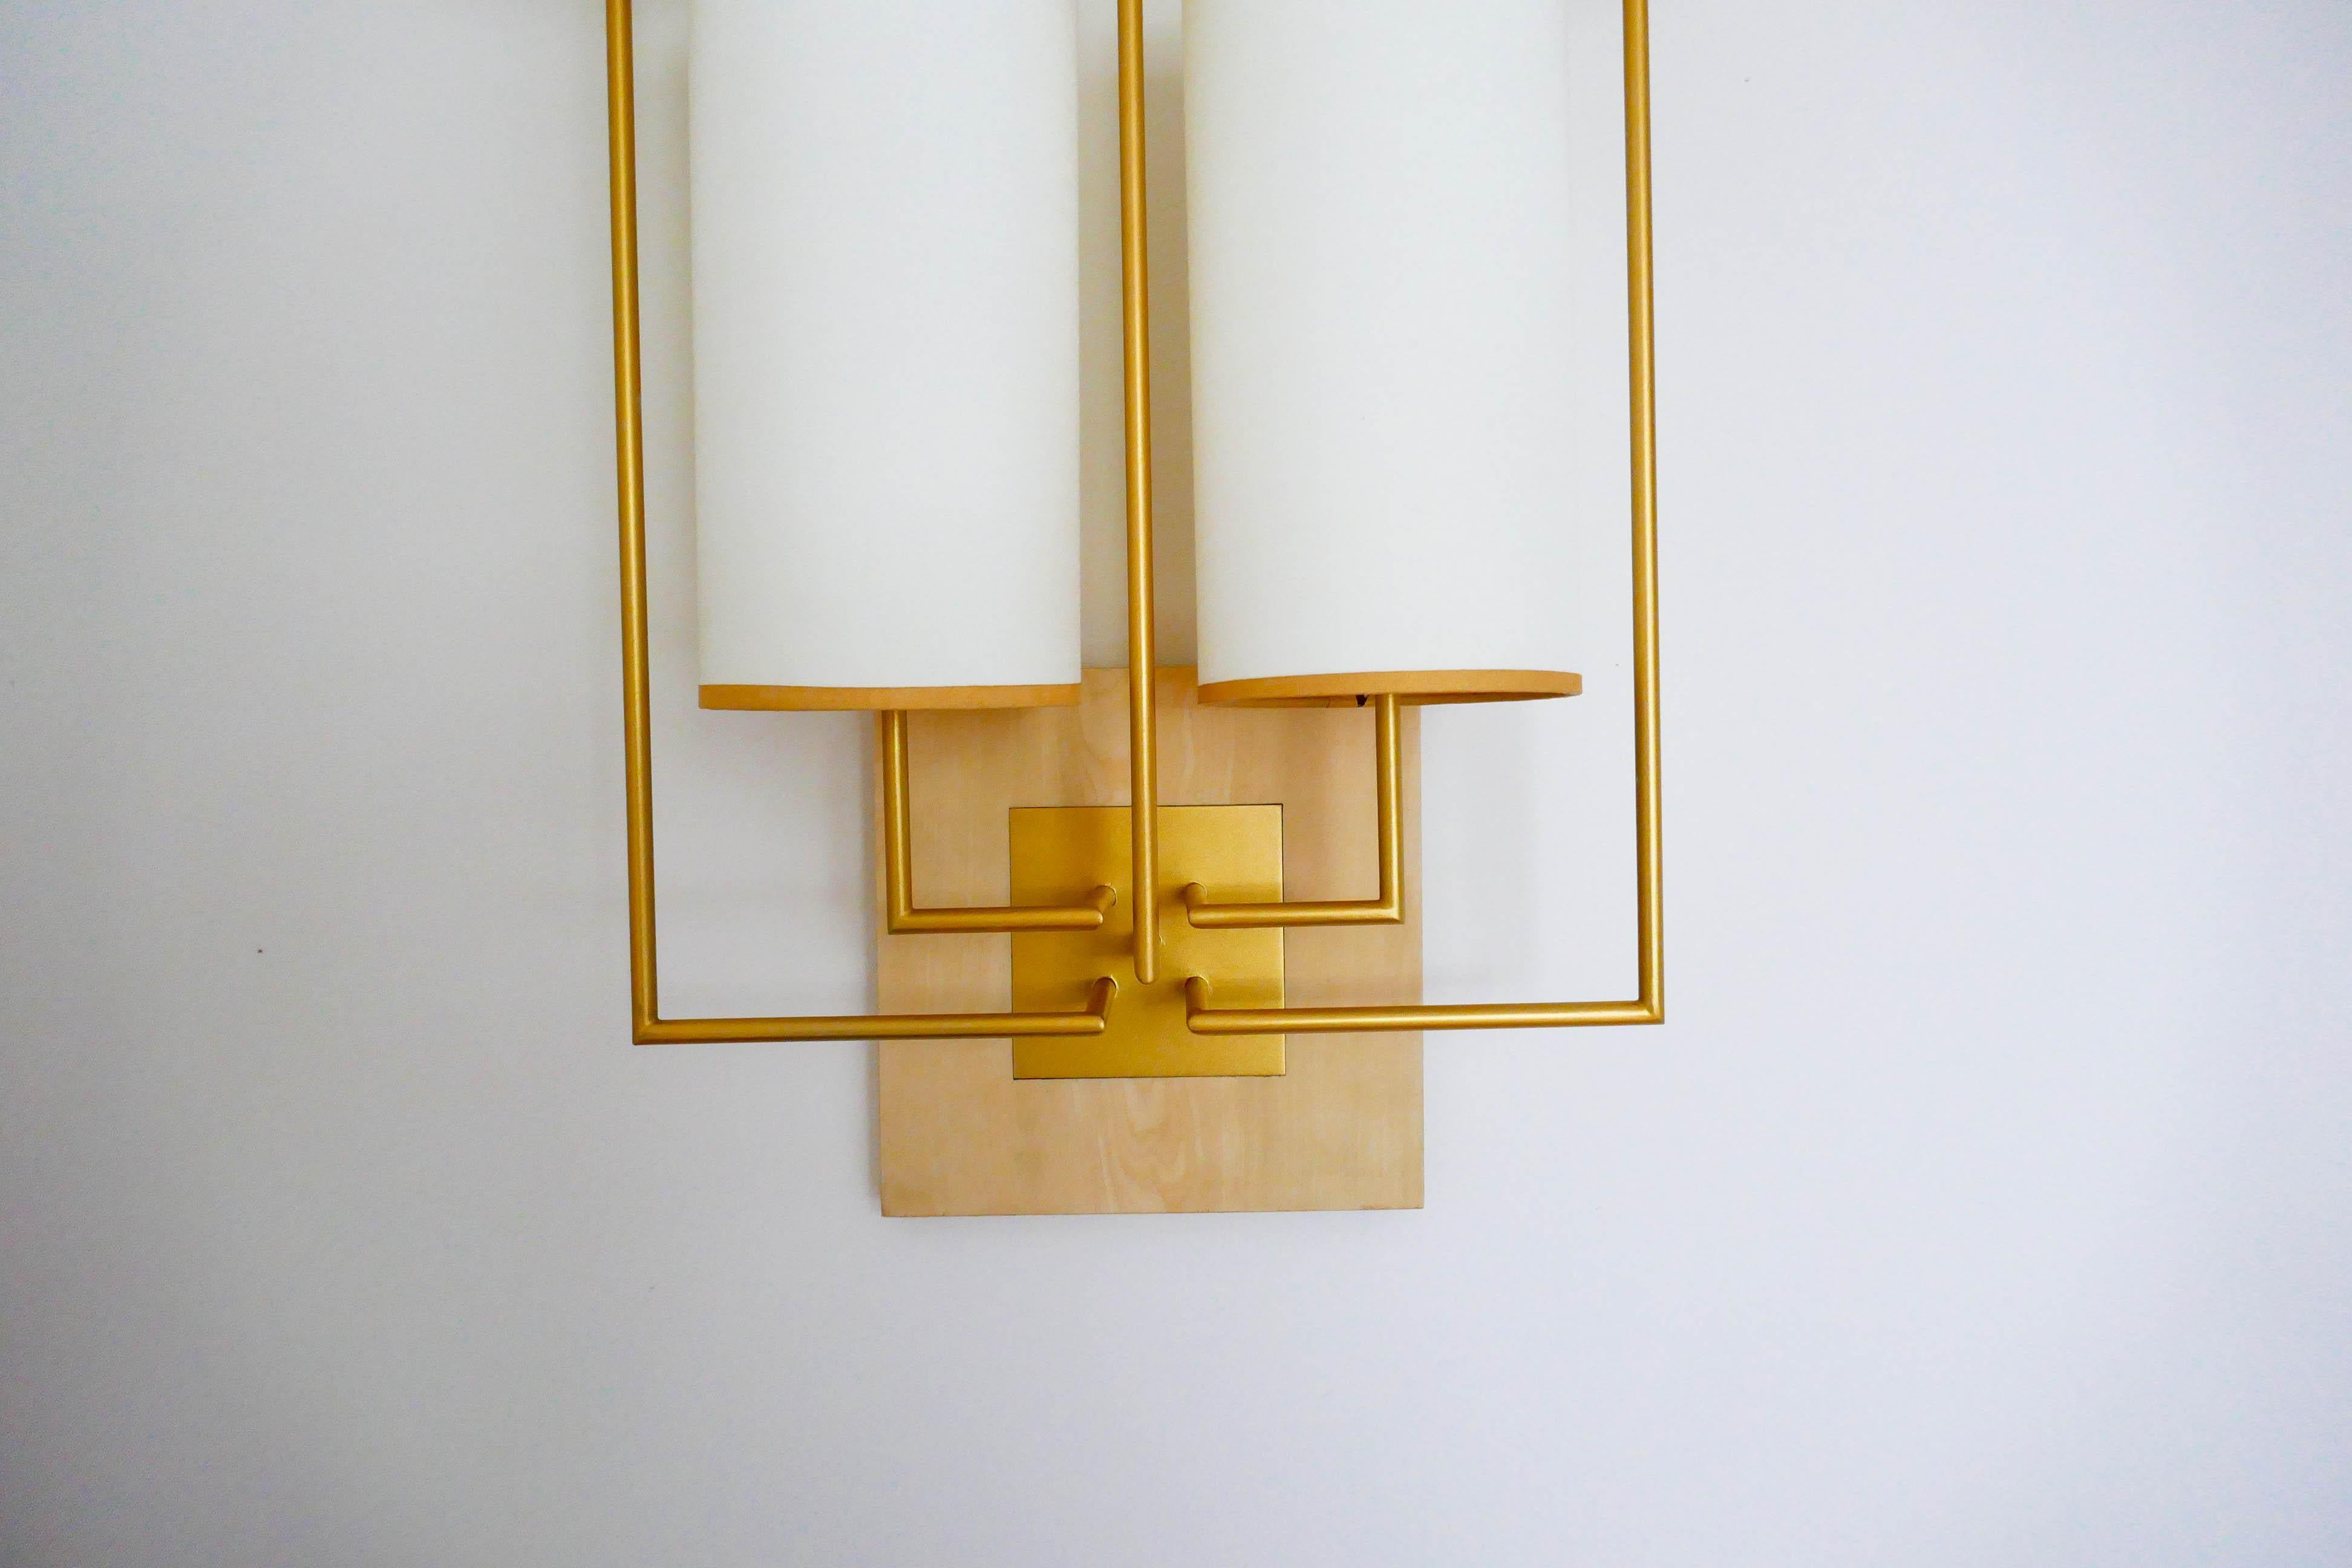 Pair of Wall Lamp Sconce in Gold Patina and White Fabric Lamp Shades For Sale 3